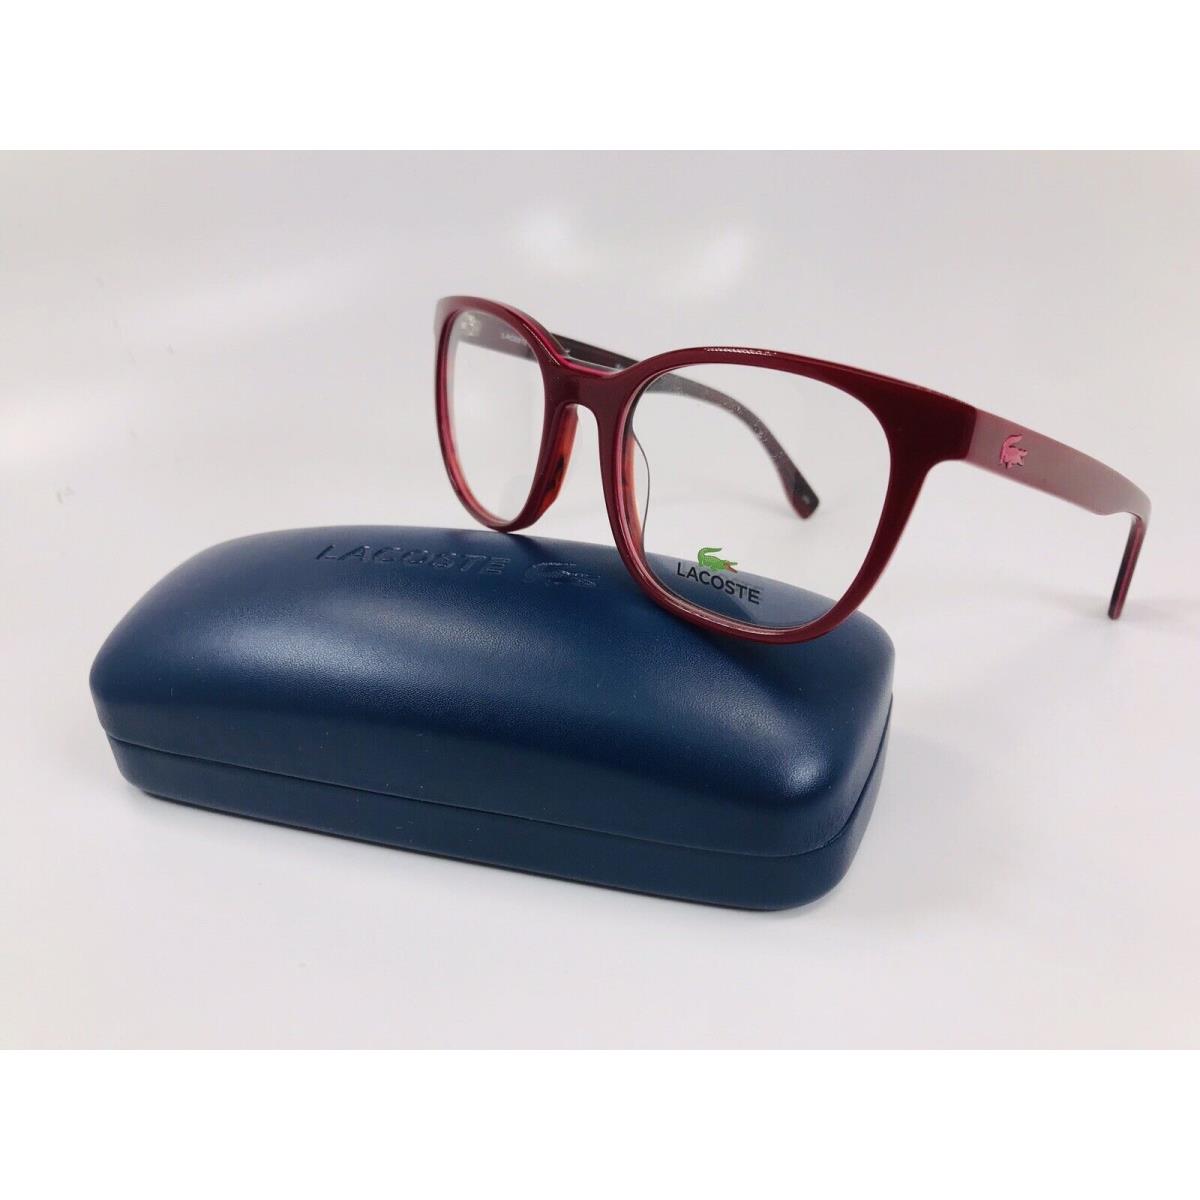 Lacoste L2809 615 Red Eyeglasses 50/19/140 with Case Cloth